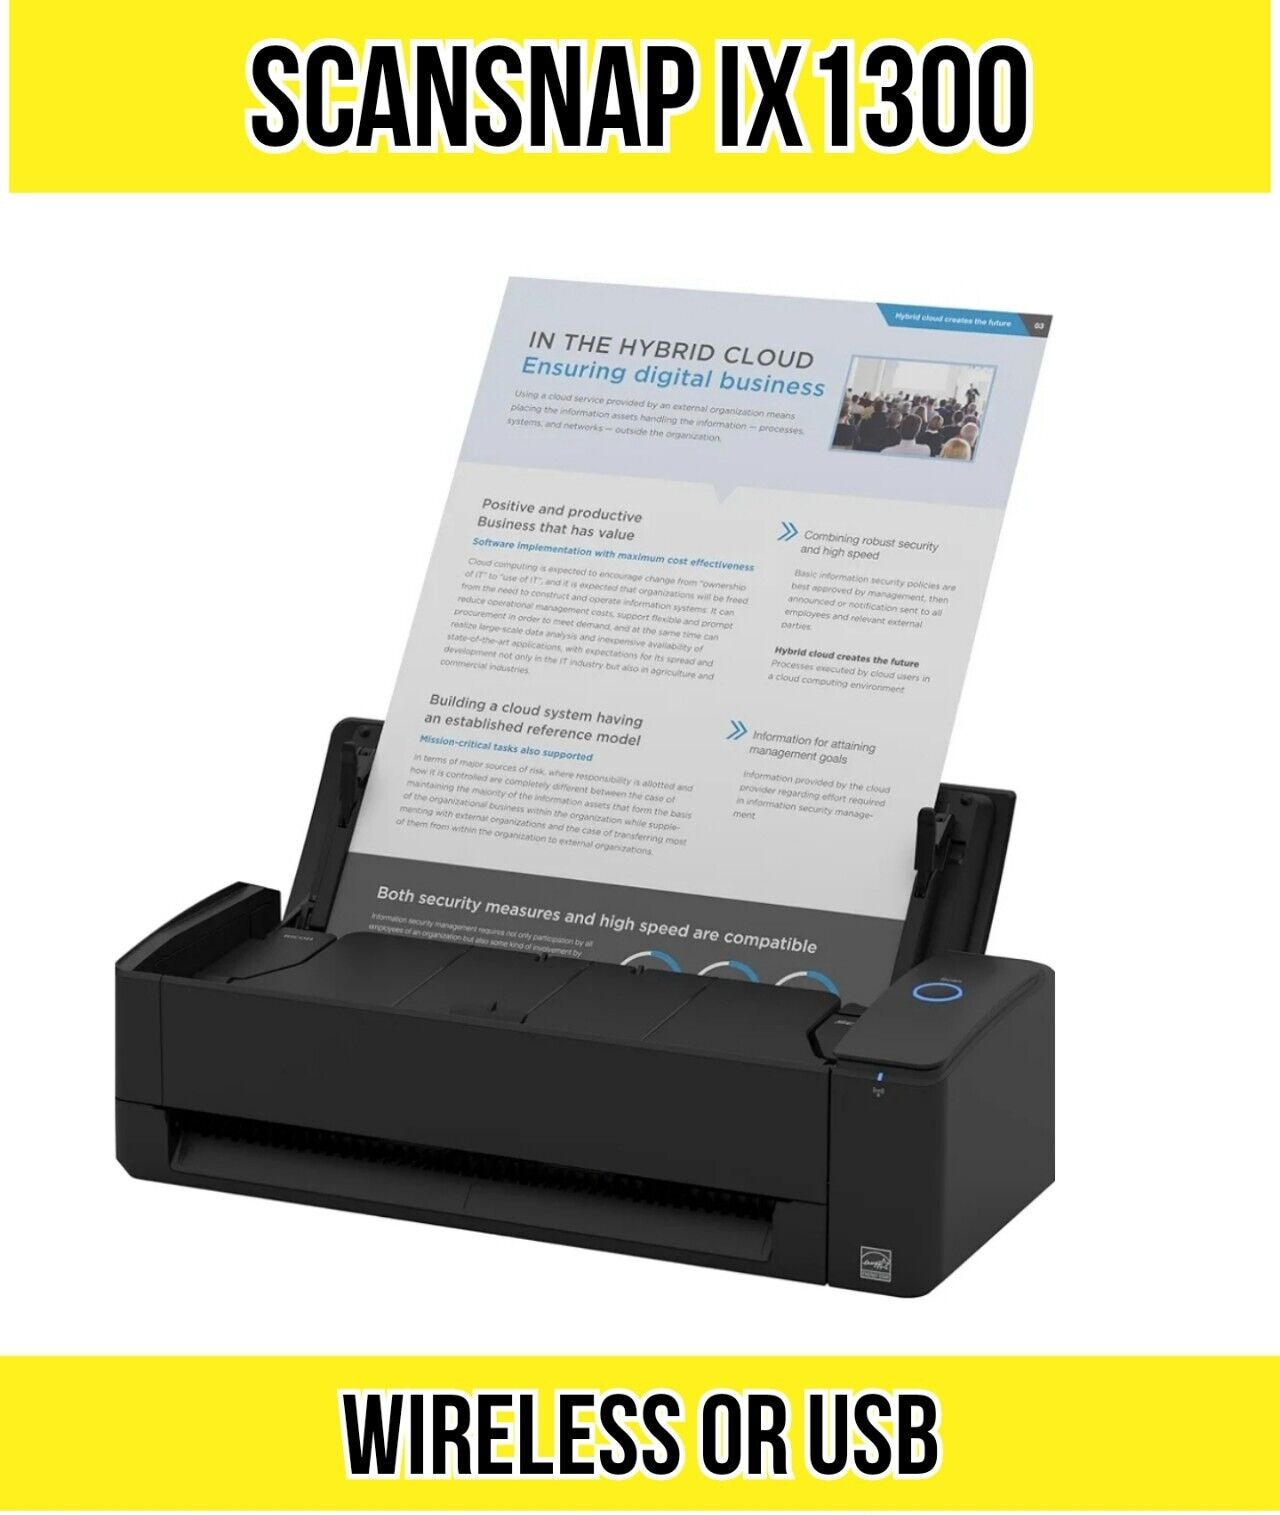 Ricoh ScanSnap ix1300 Document Scanner (Black)-Compact Wireless or USB Double